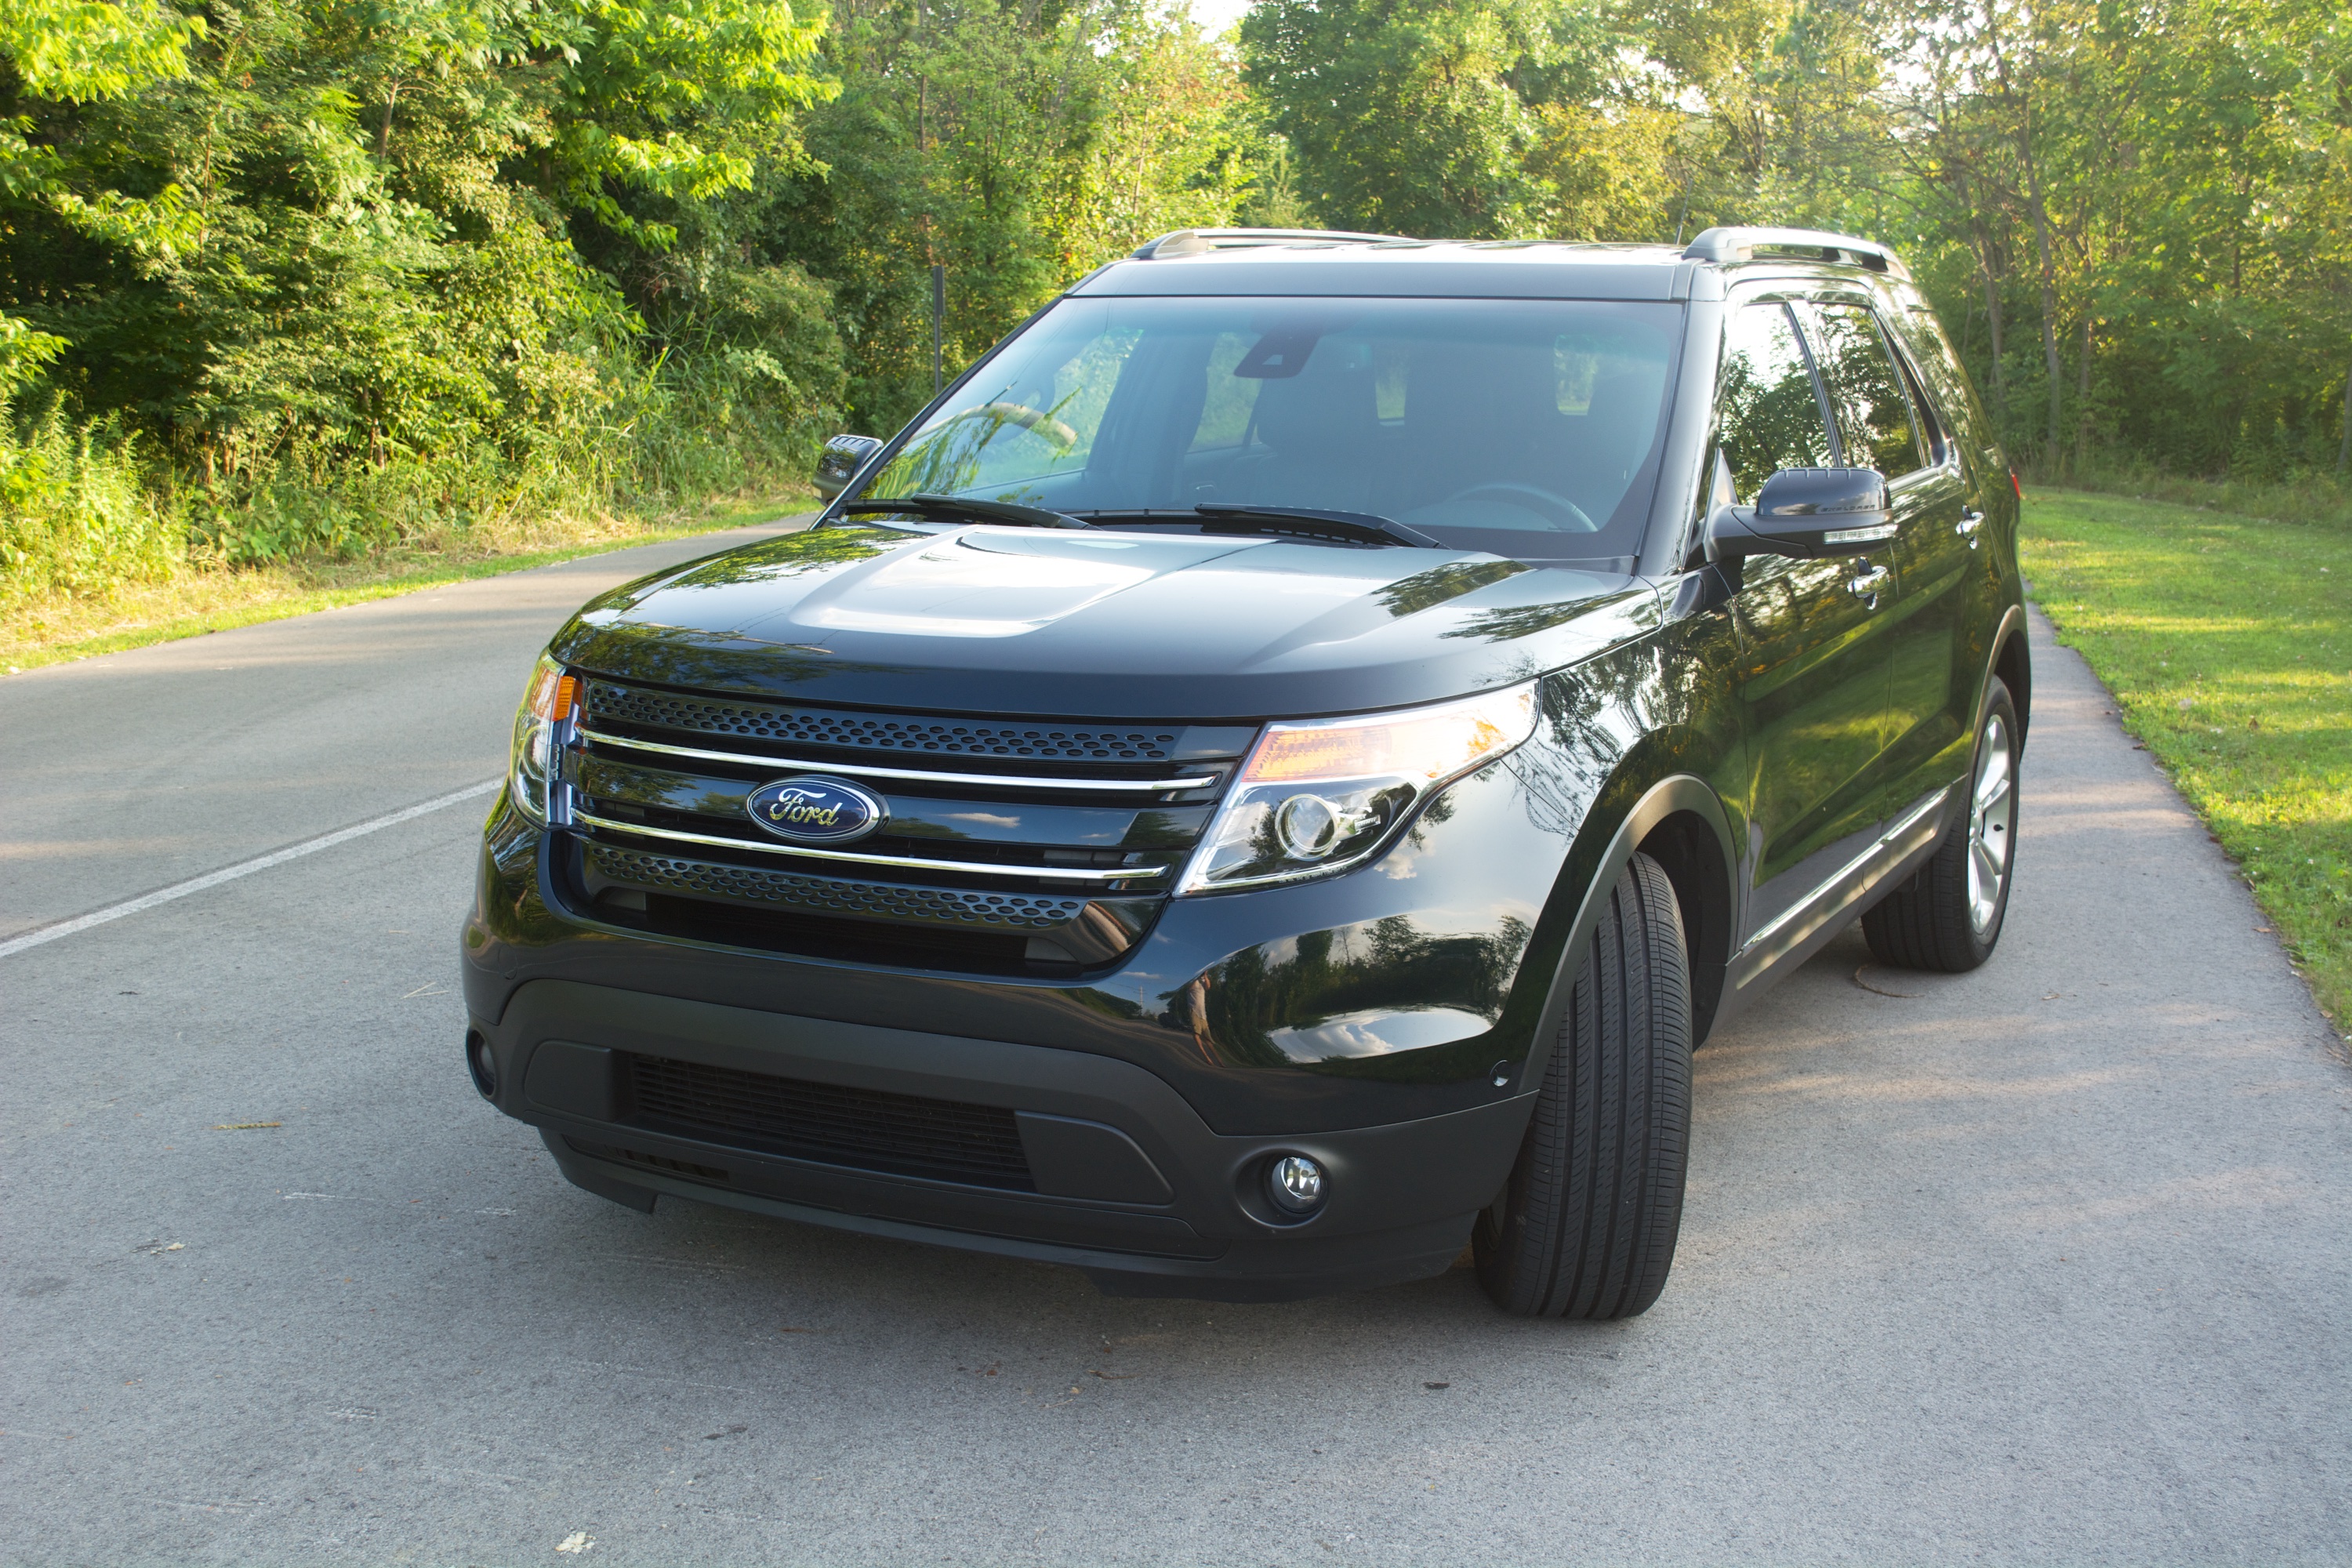 2008 ford explorer limited edition review